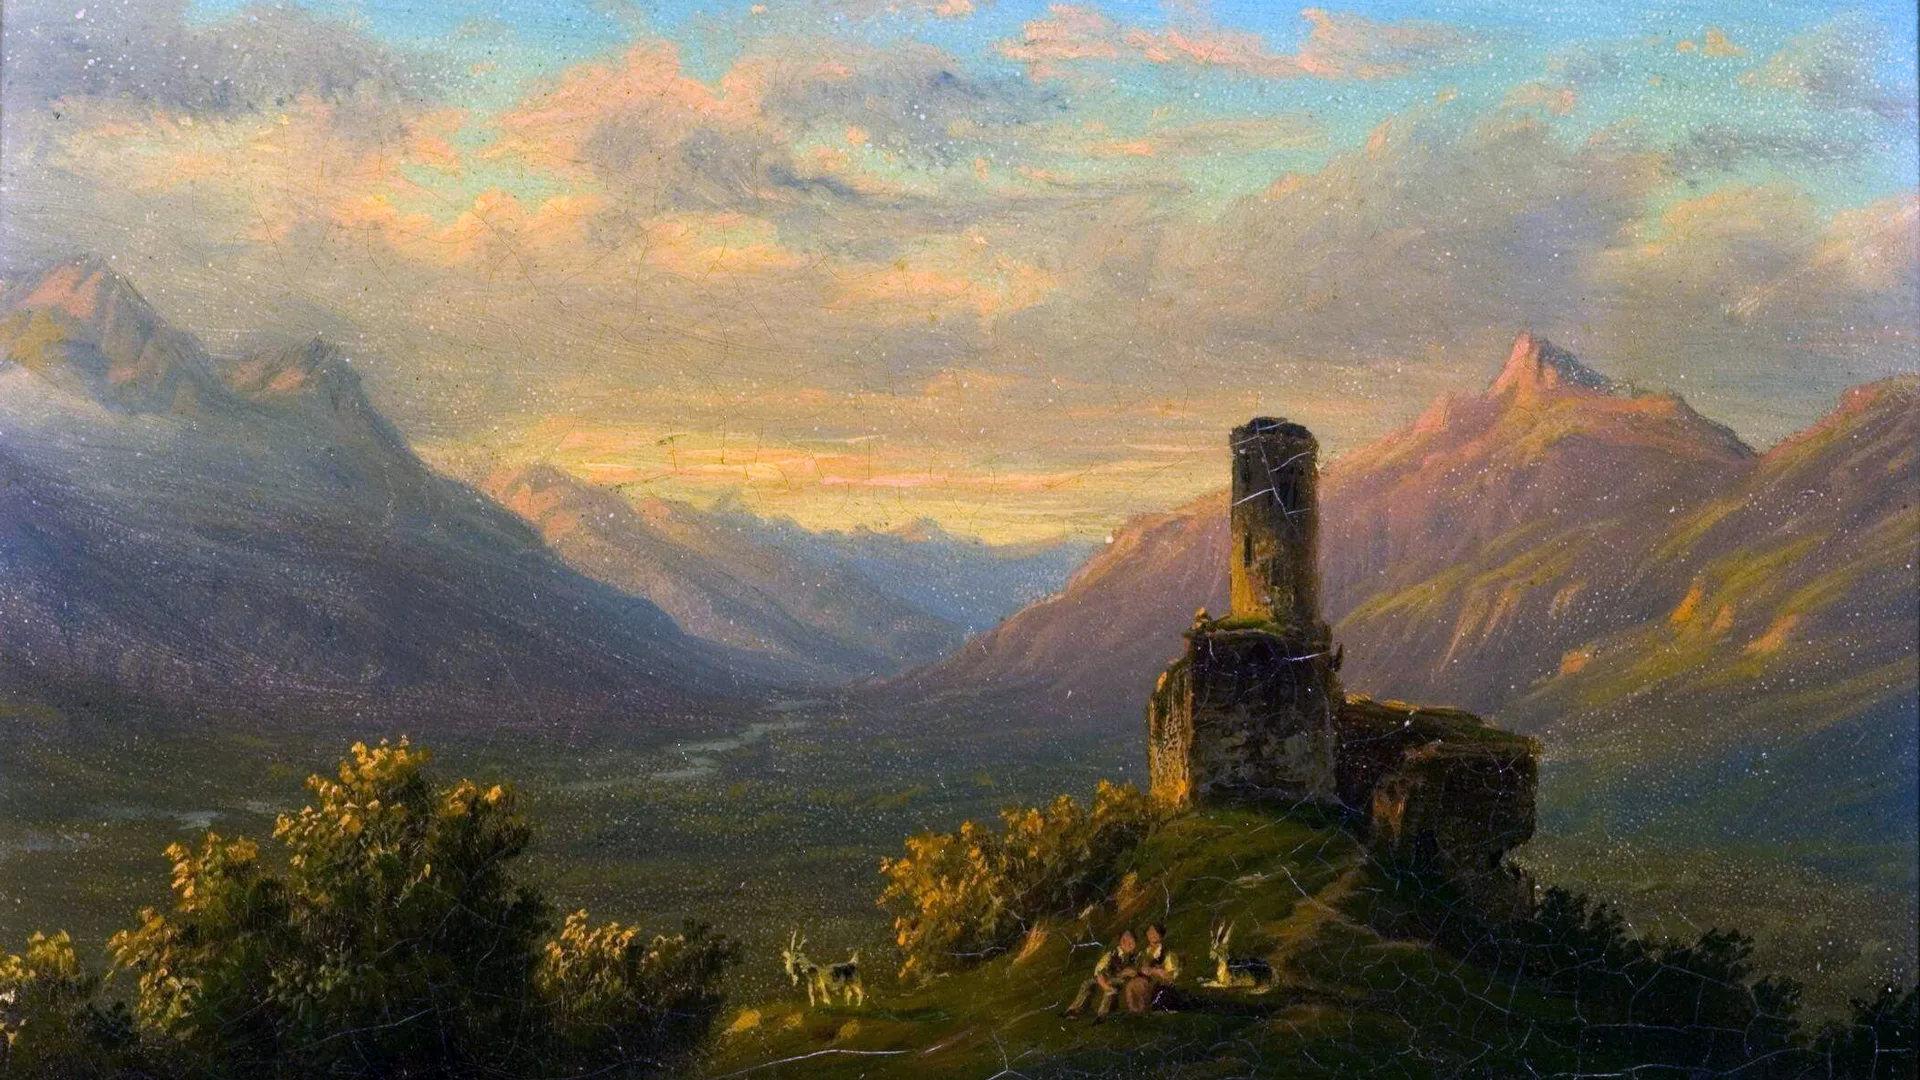 A 19th century painting showing a scene on a hill with a house and mountains in the background at sunset with creamy vanilla coloured clouds in the sky.